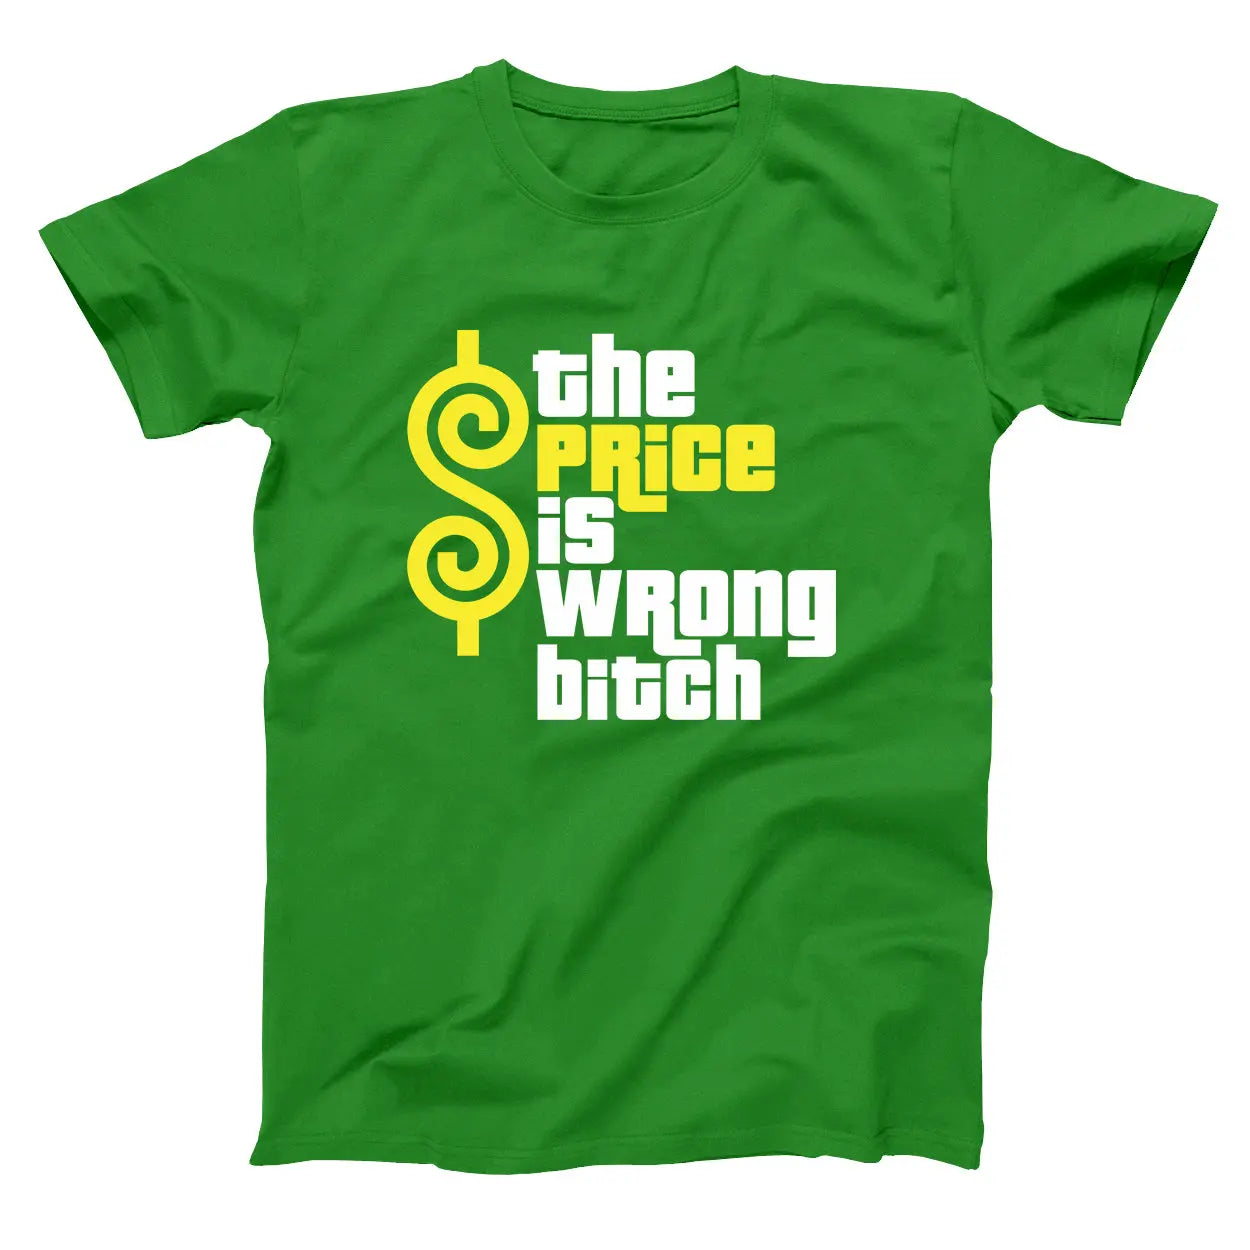 The Price Is Wrong Bitch Tshirt - Donkey Tees